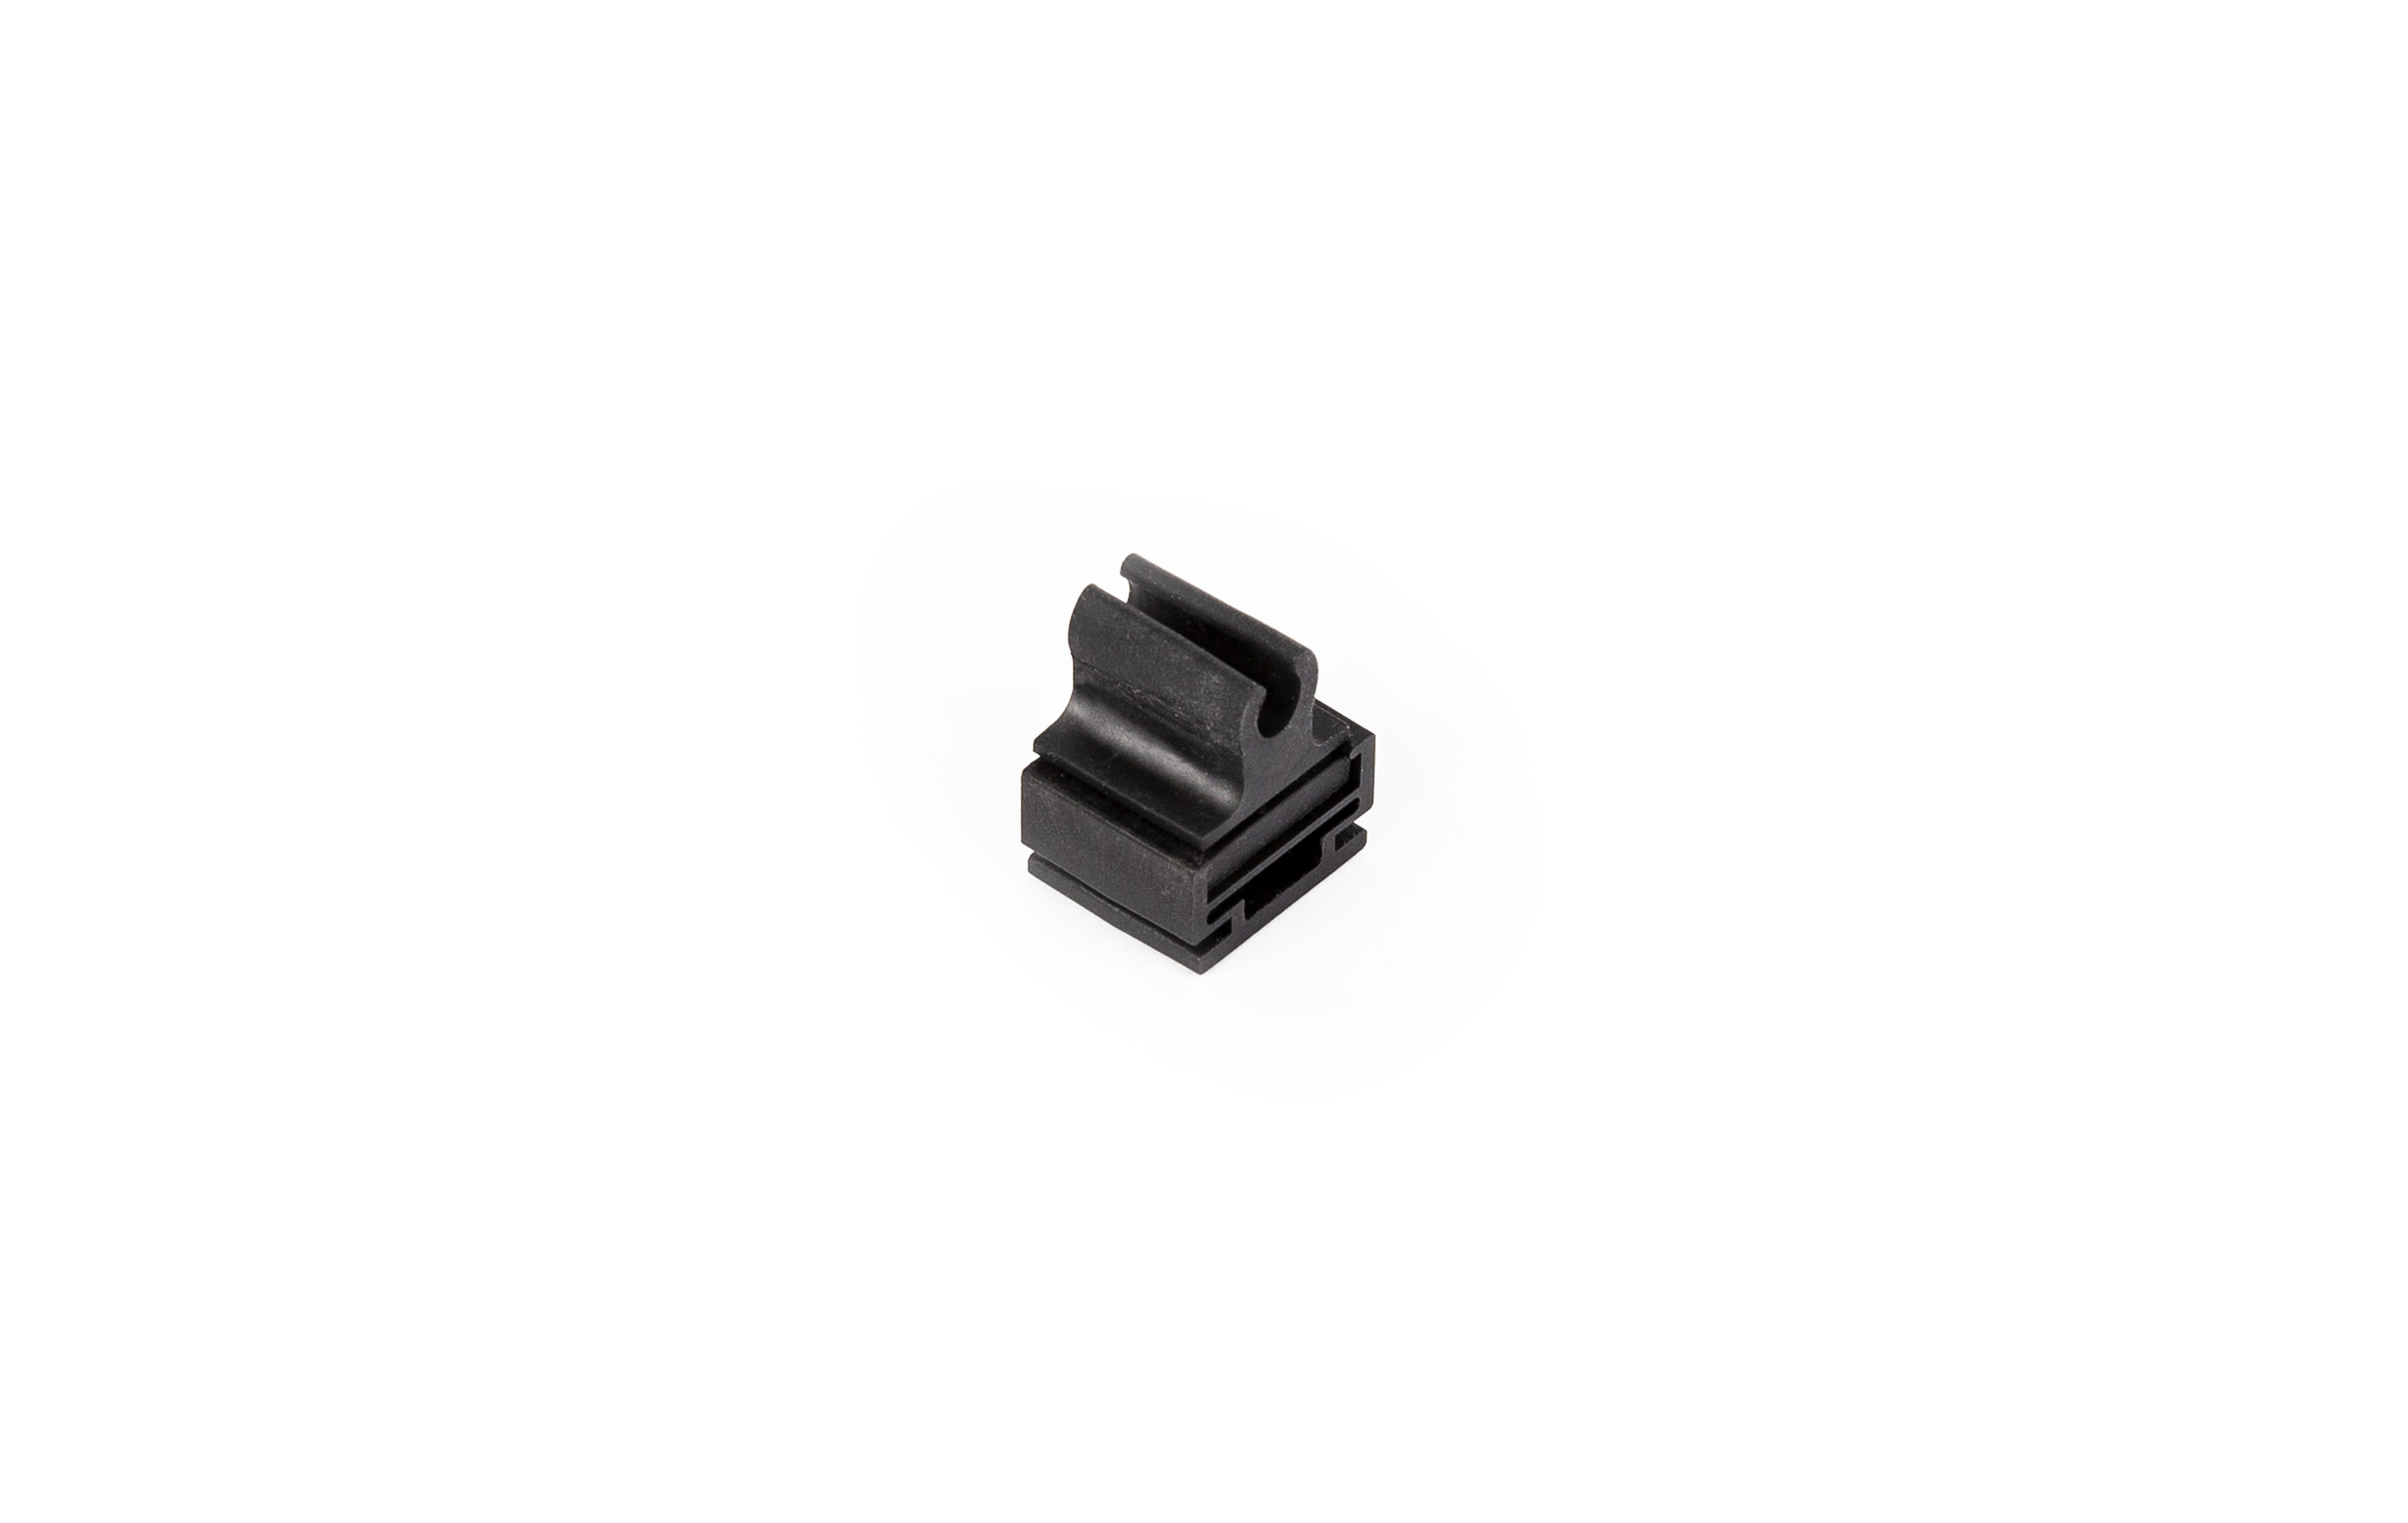 Cold Shoe Mount with Standard (1/4 in) Thread (CS4099)